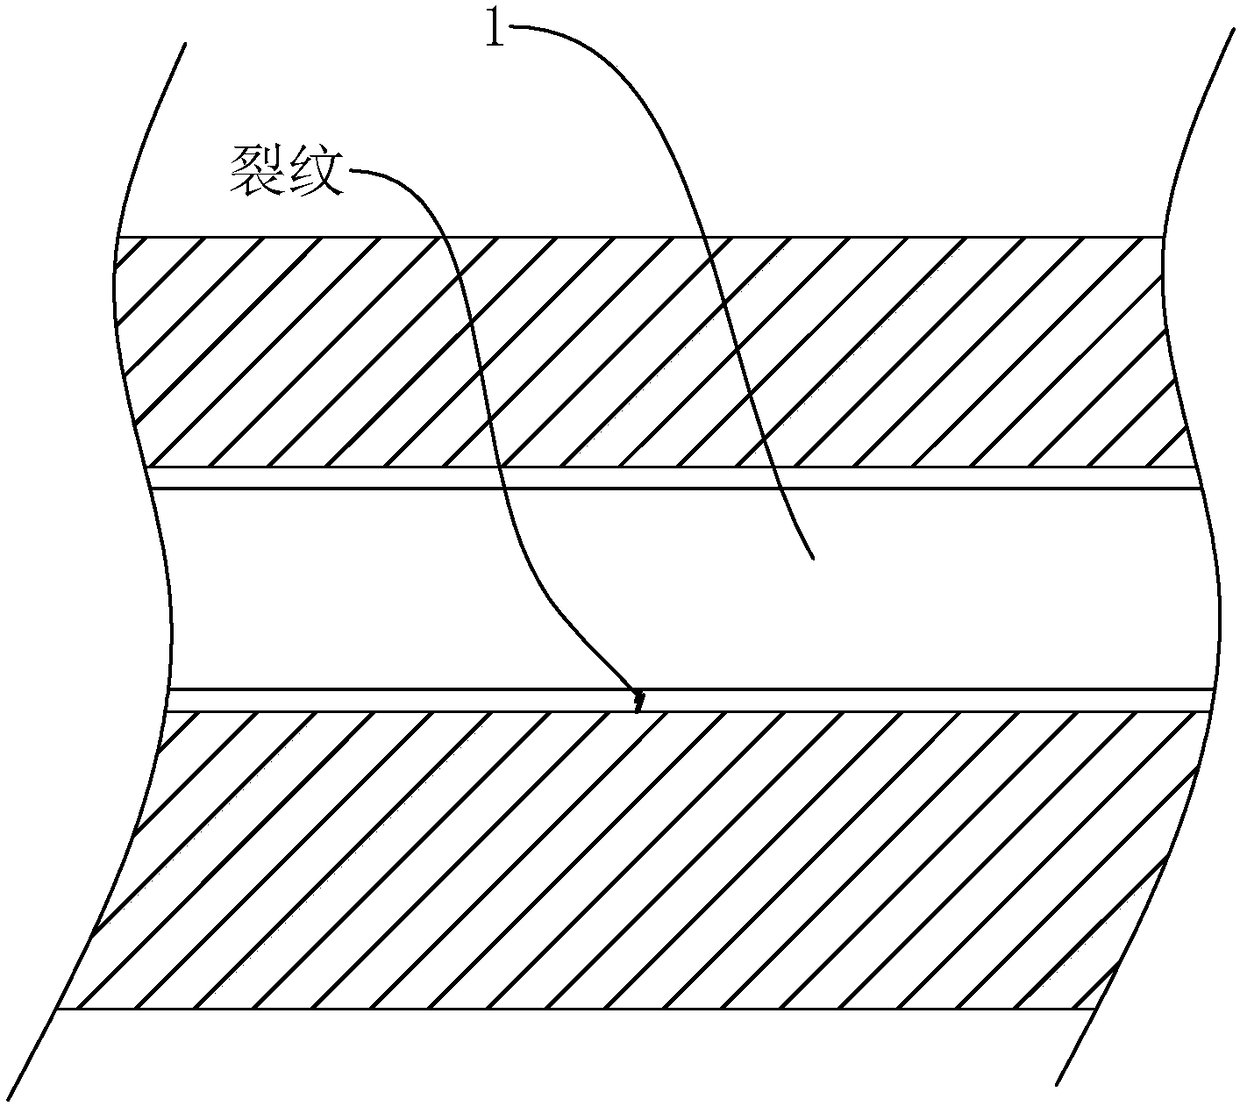 Municipal sewer pipe repair device and its construction method